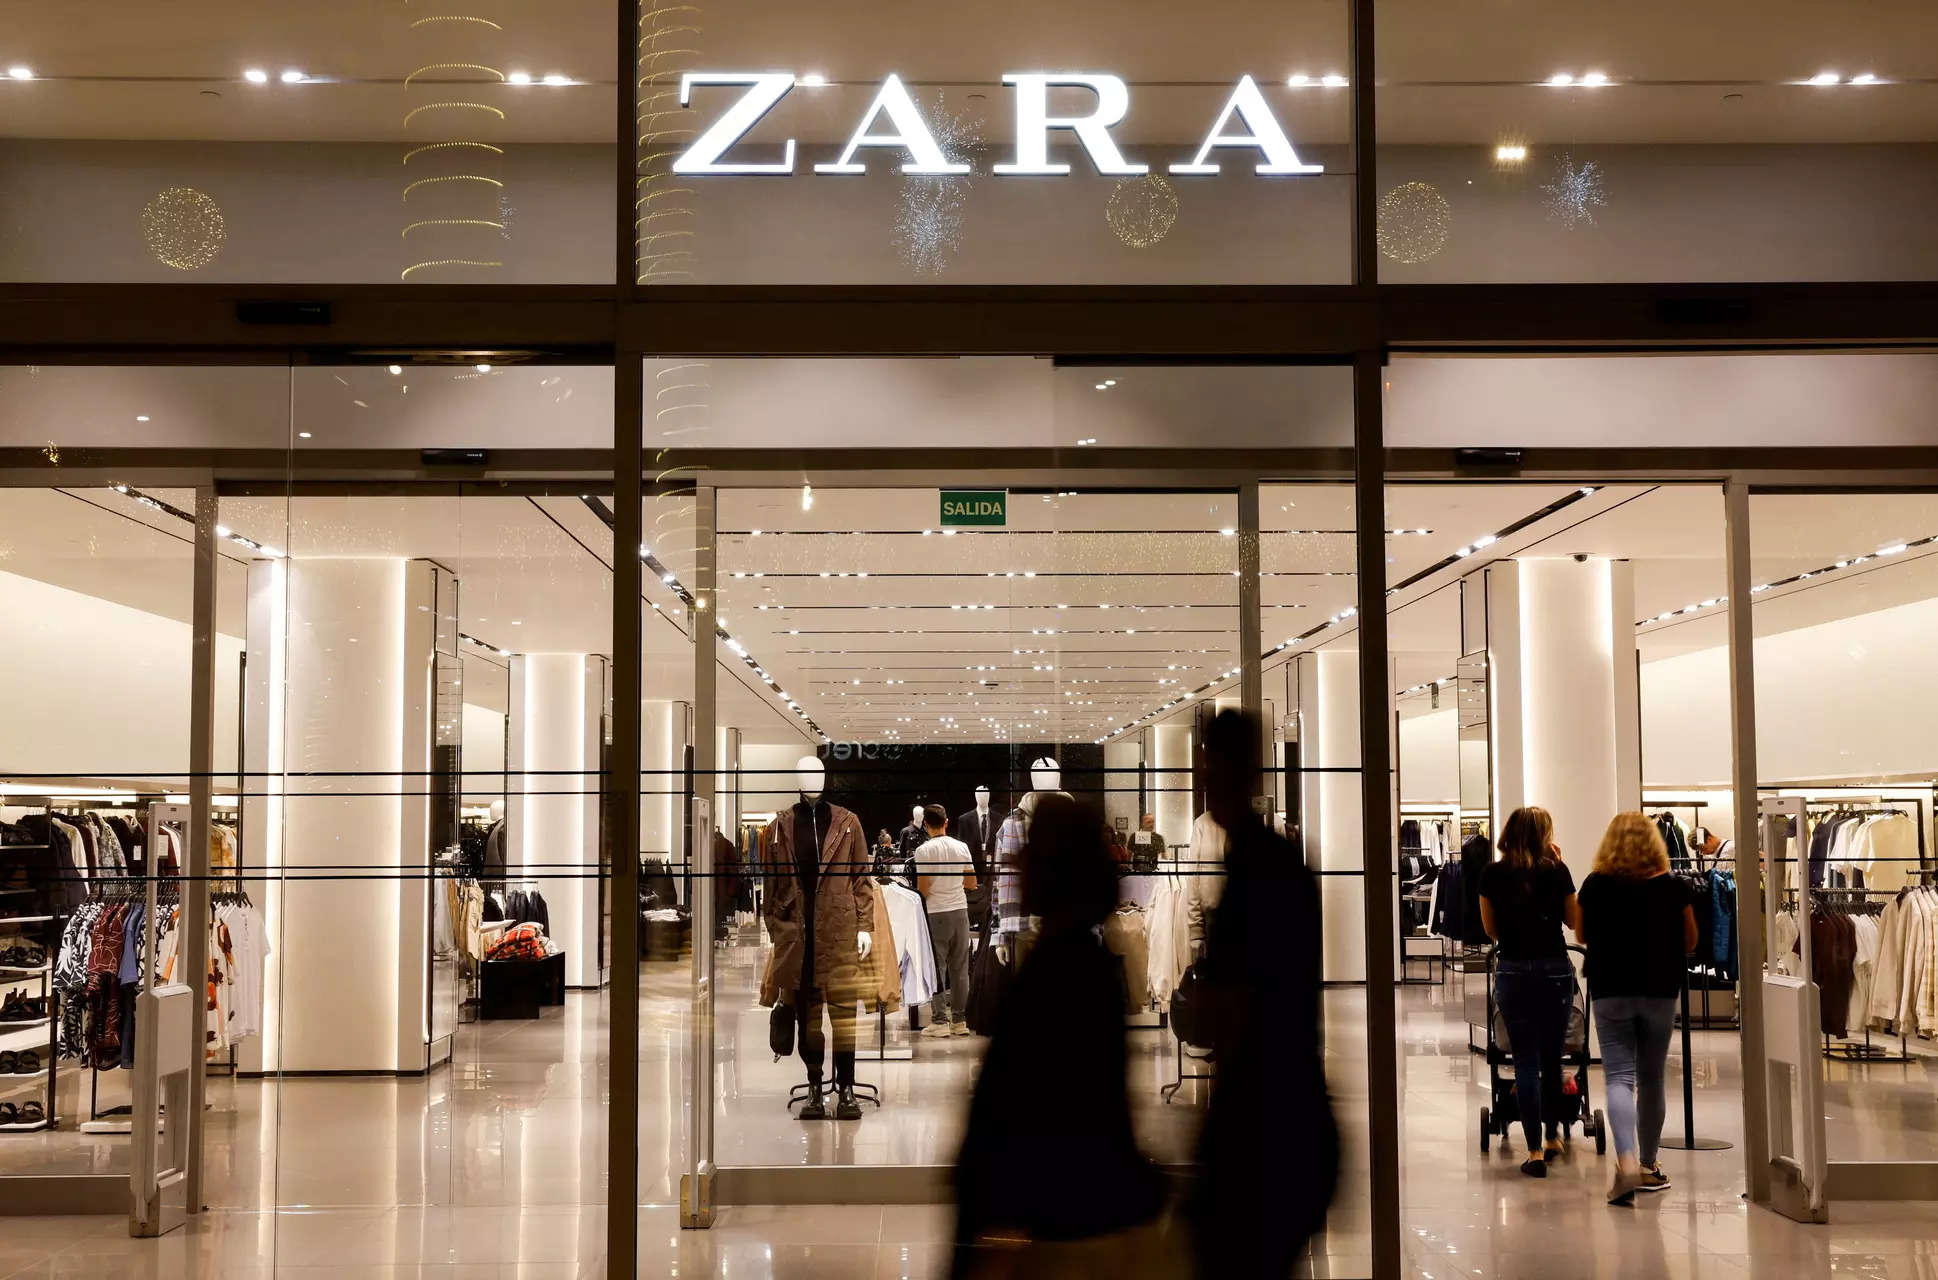 Zara owner Inditex says it will stop buying clothes from Myanmar